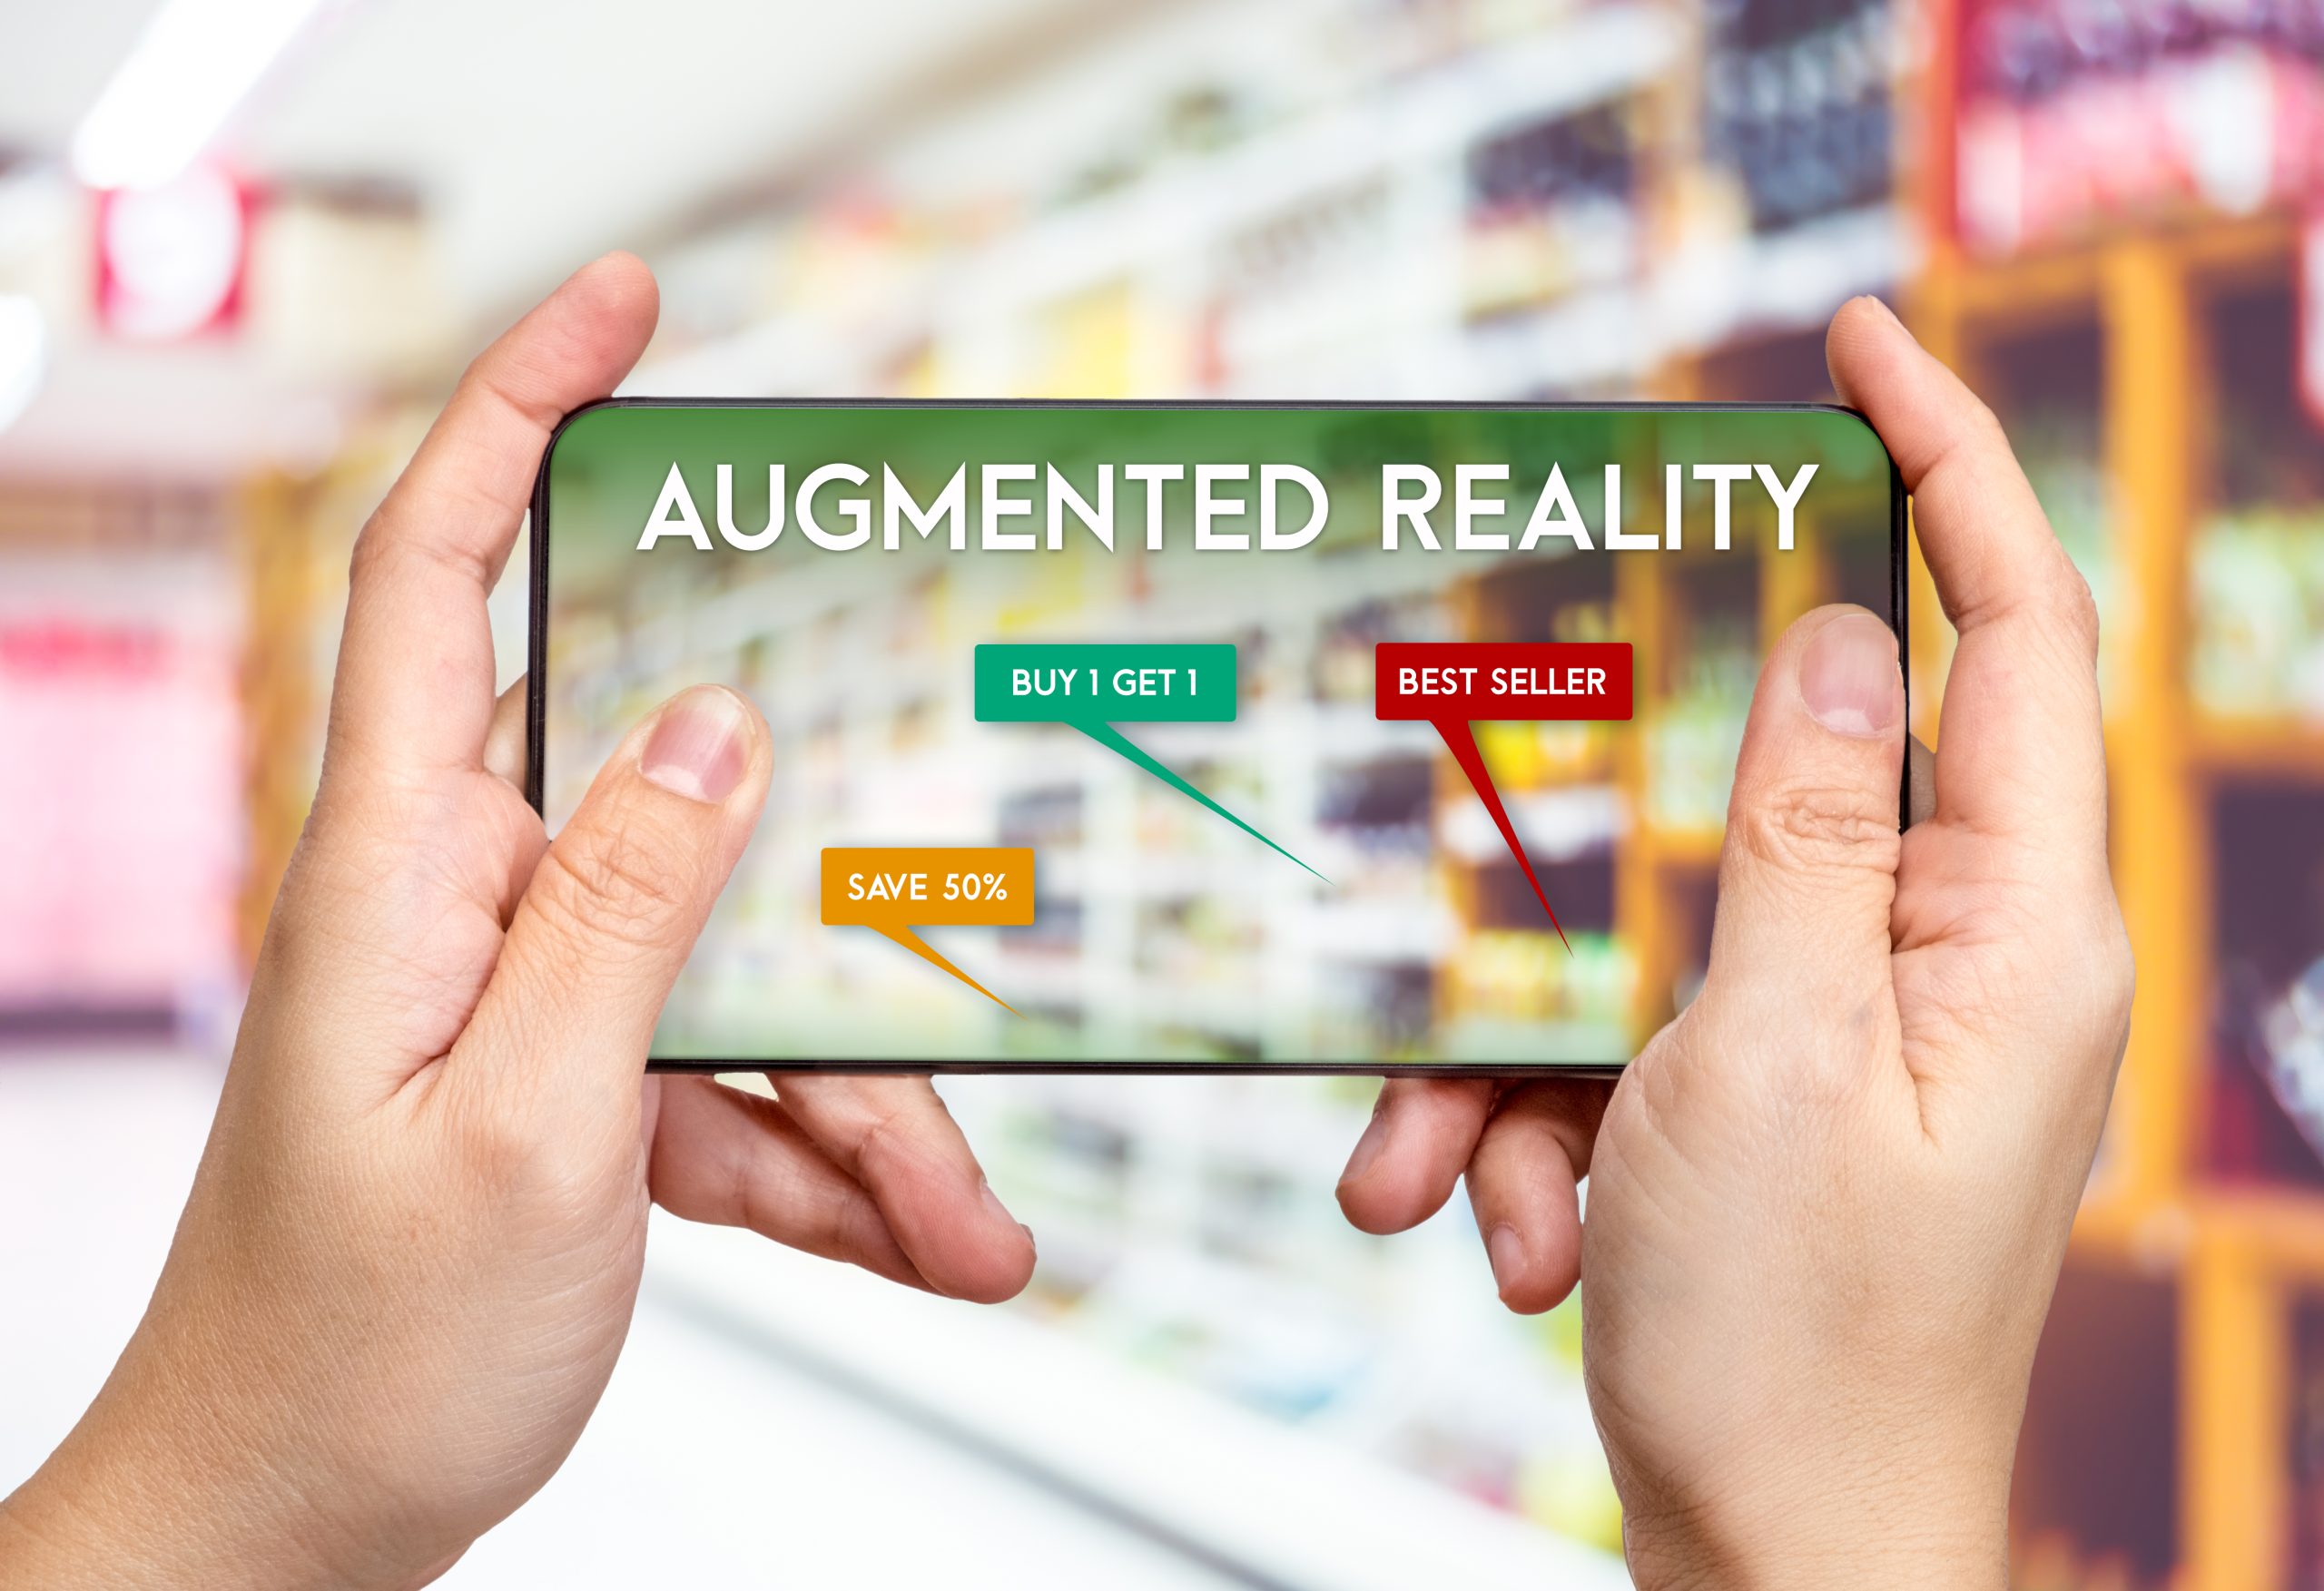 3 Surprising Developments Related To The Recent Rise Of Augmented Reality